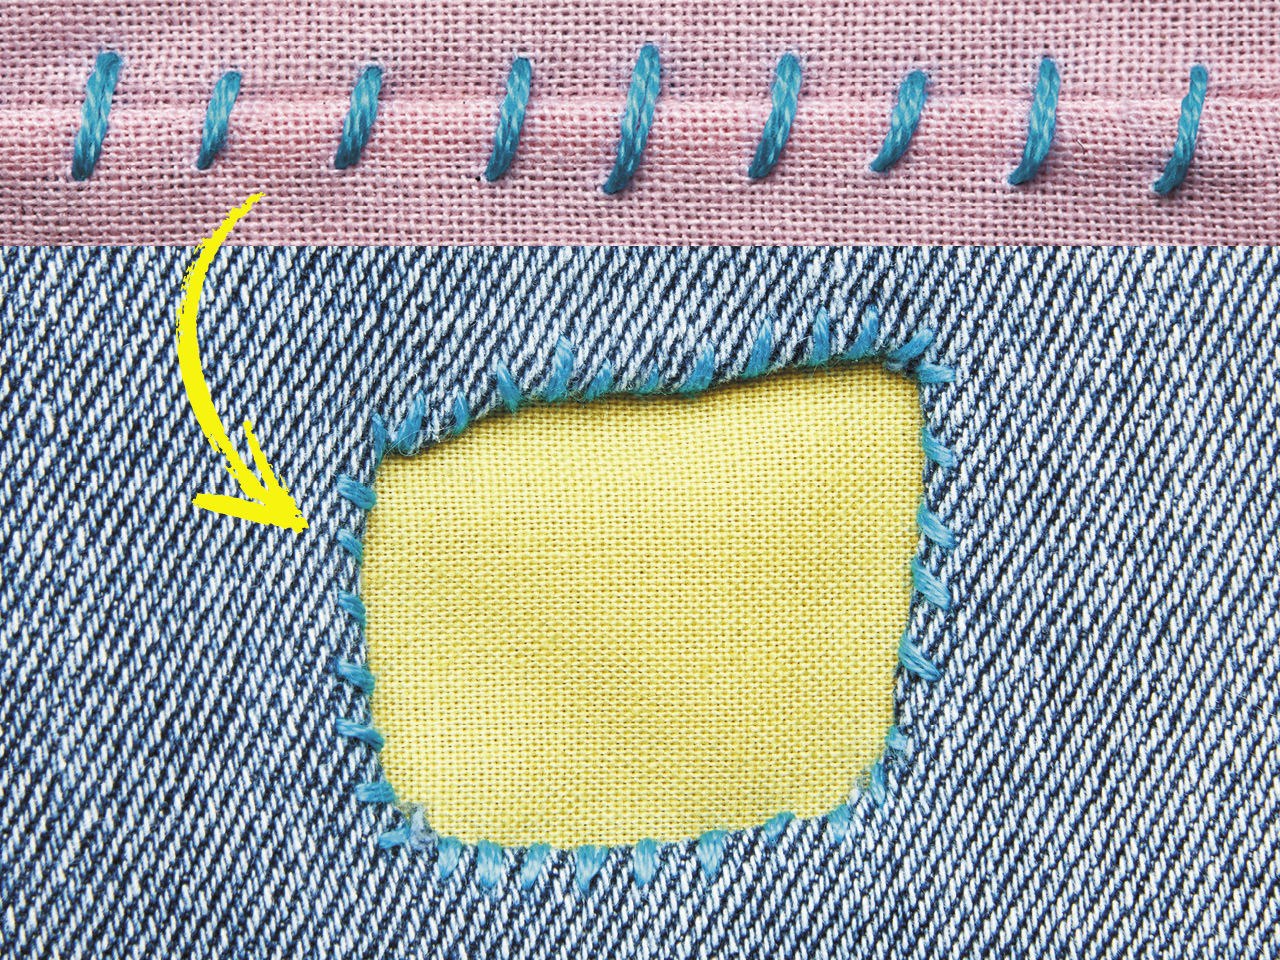 A demonstration of the whip stitch in blue thread on denim and yellow fabric